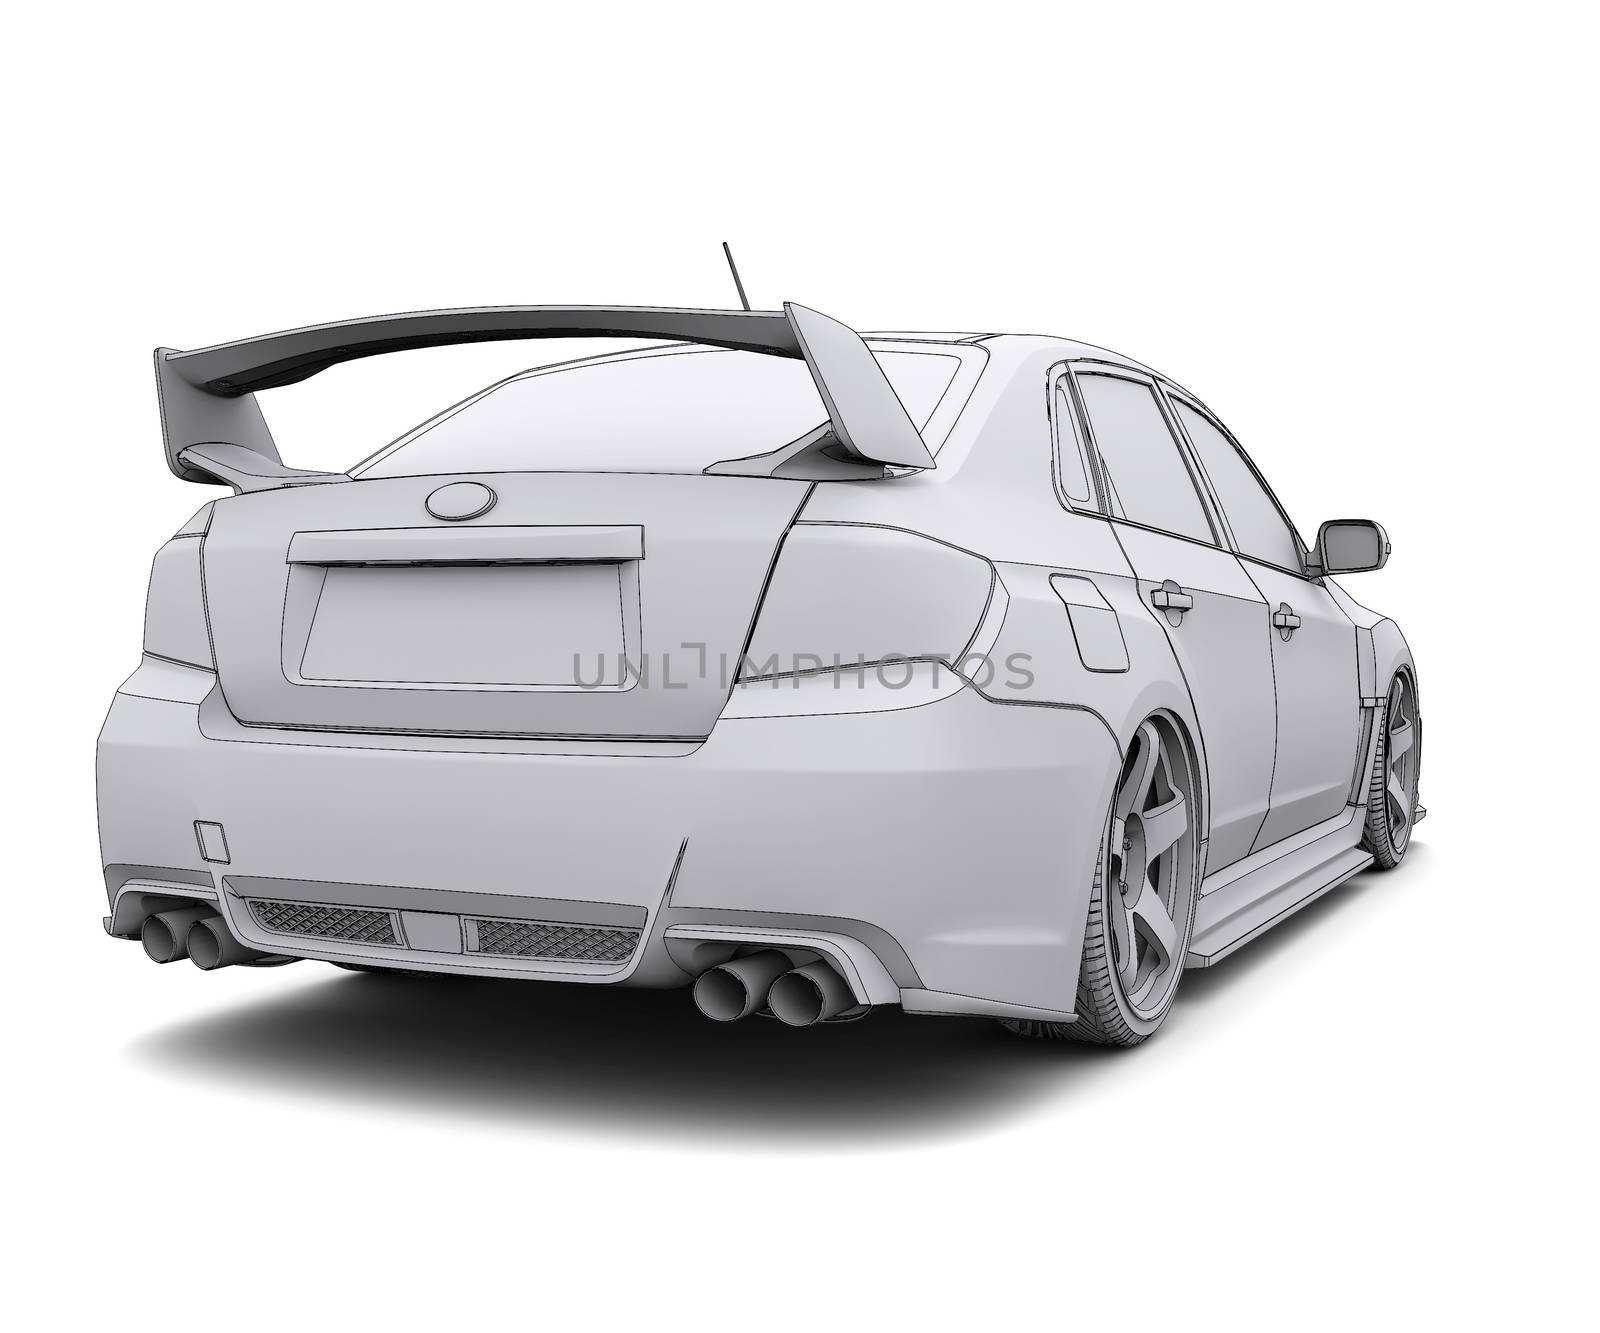 Car rendering in lines. Isolated render on a white background